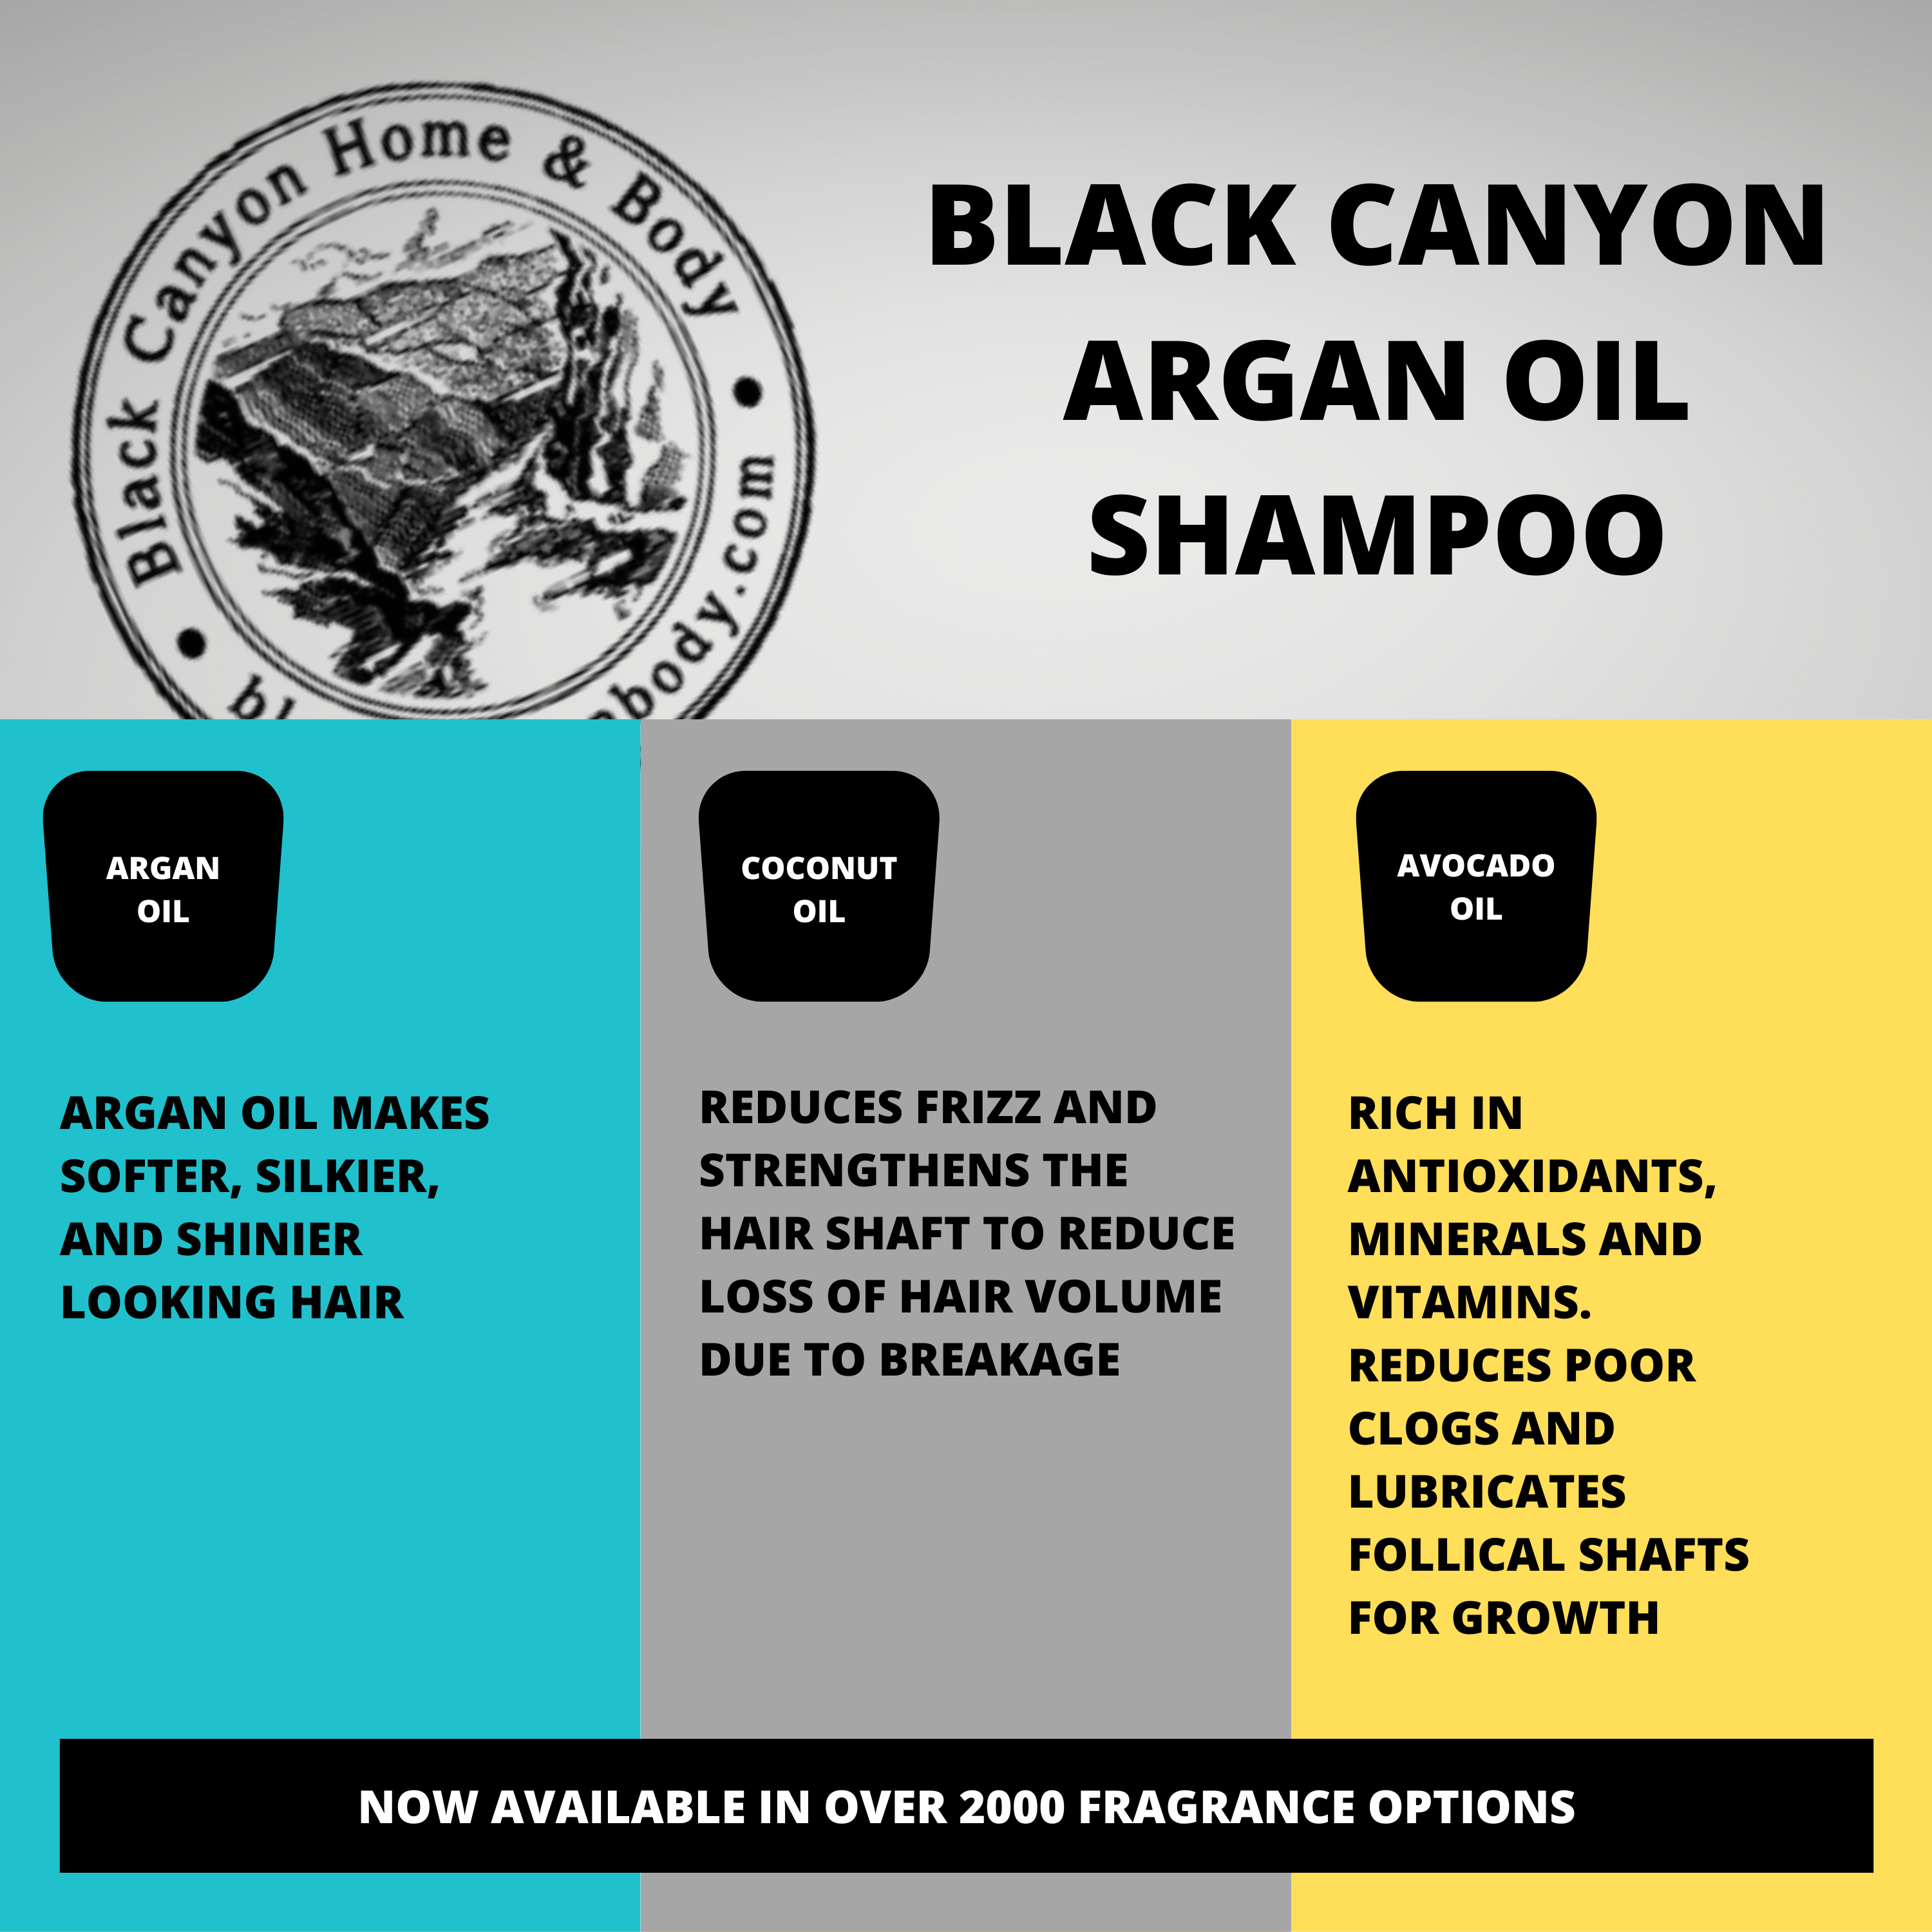 Black Canyon Black Currant Champagne Scented Shampoo with Argan Oil